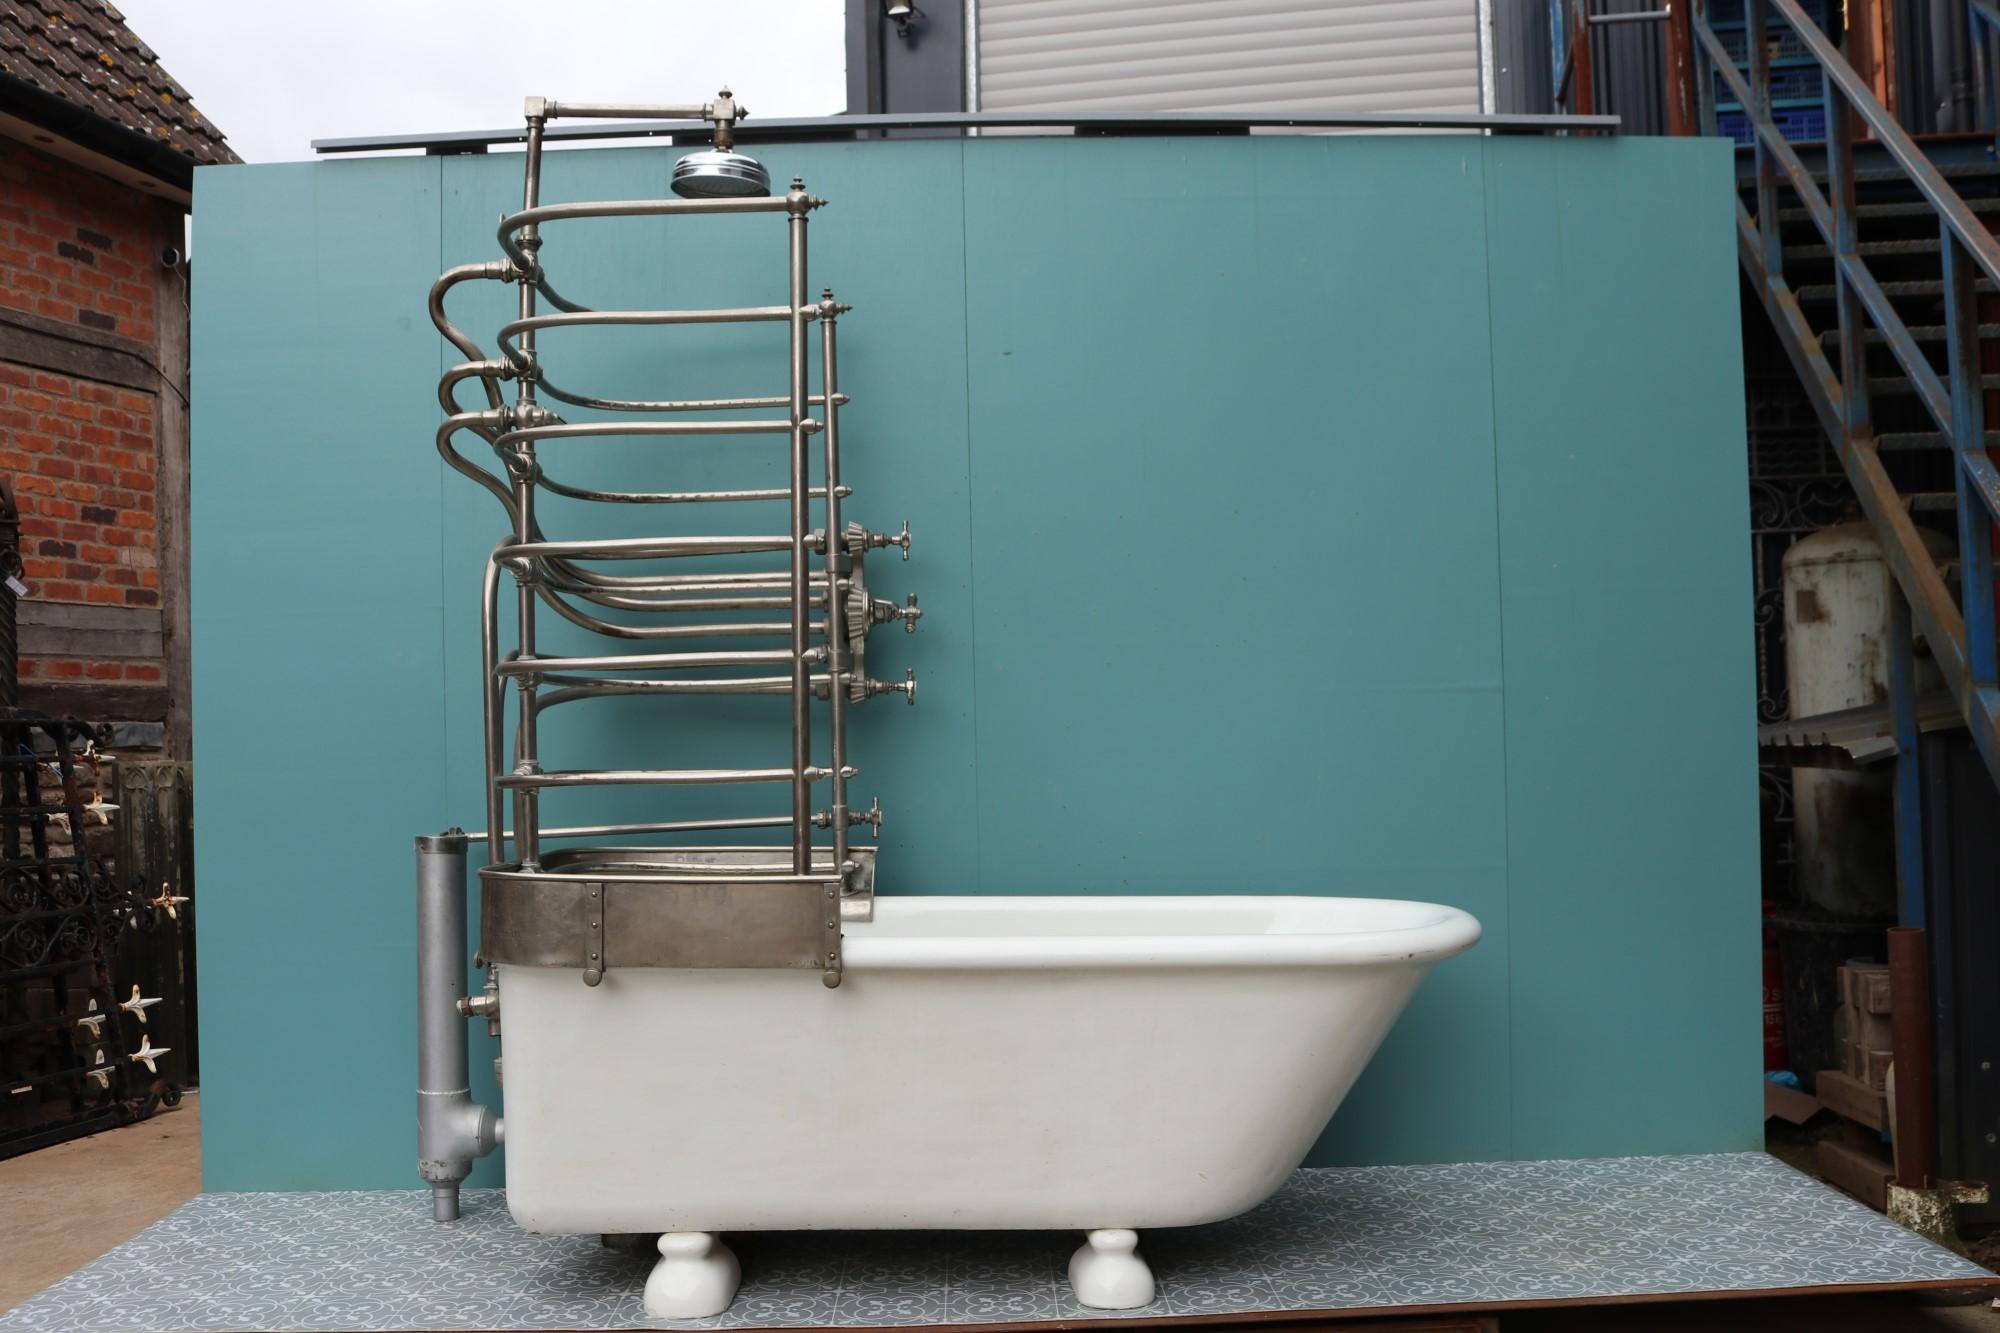 A very unusual reclaimed canopy bath, salvaged from a large private house in London. The glazed earthenware bath is made by Rufford & Co and metal components by Low & Duff Ltd, Edinburgh. Fitted with a plunger waste. This bath was previously fitted